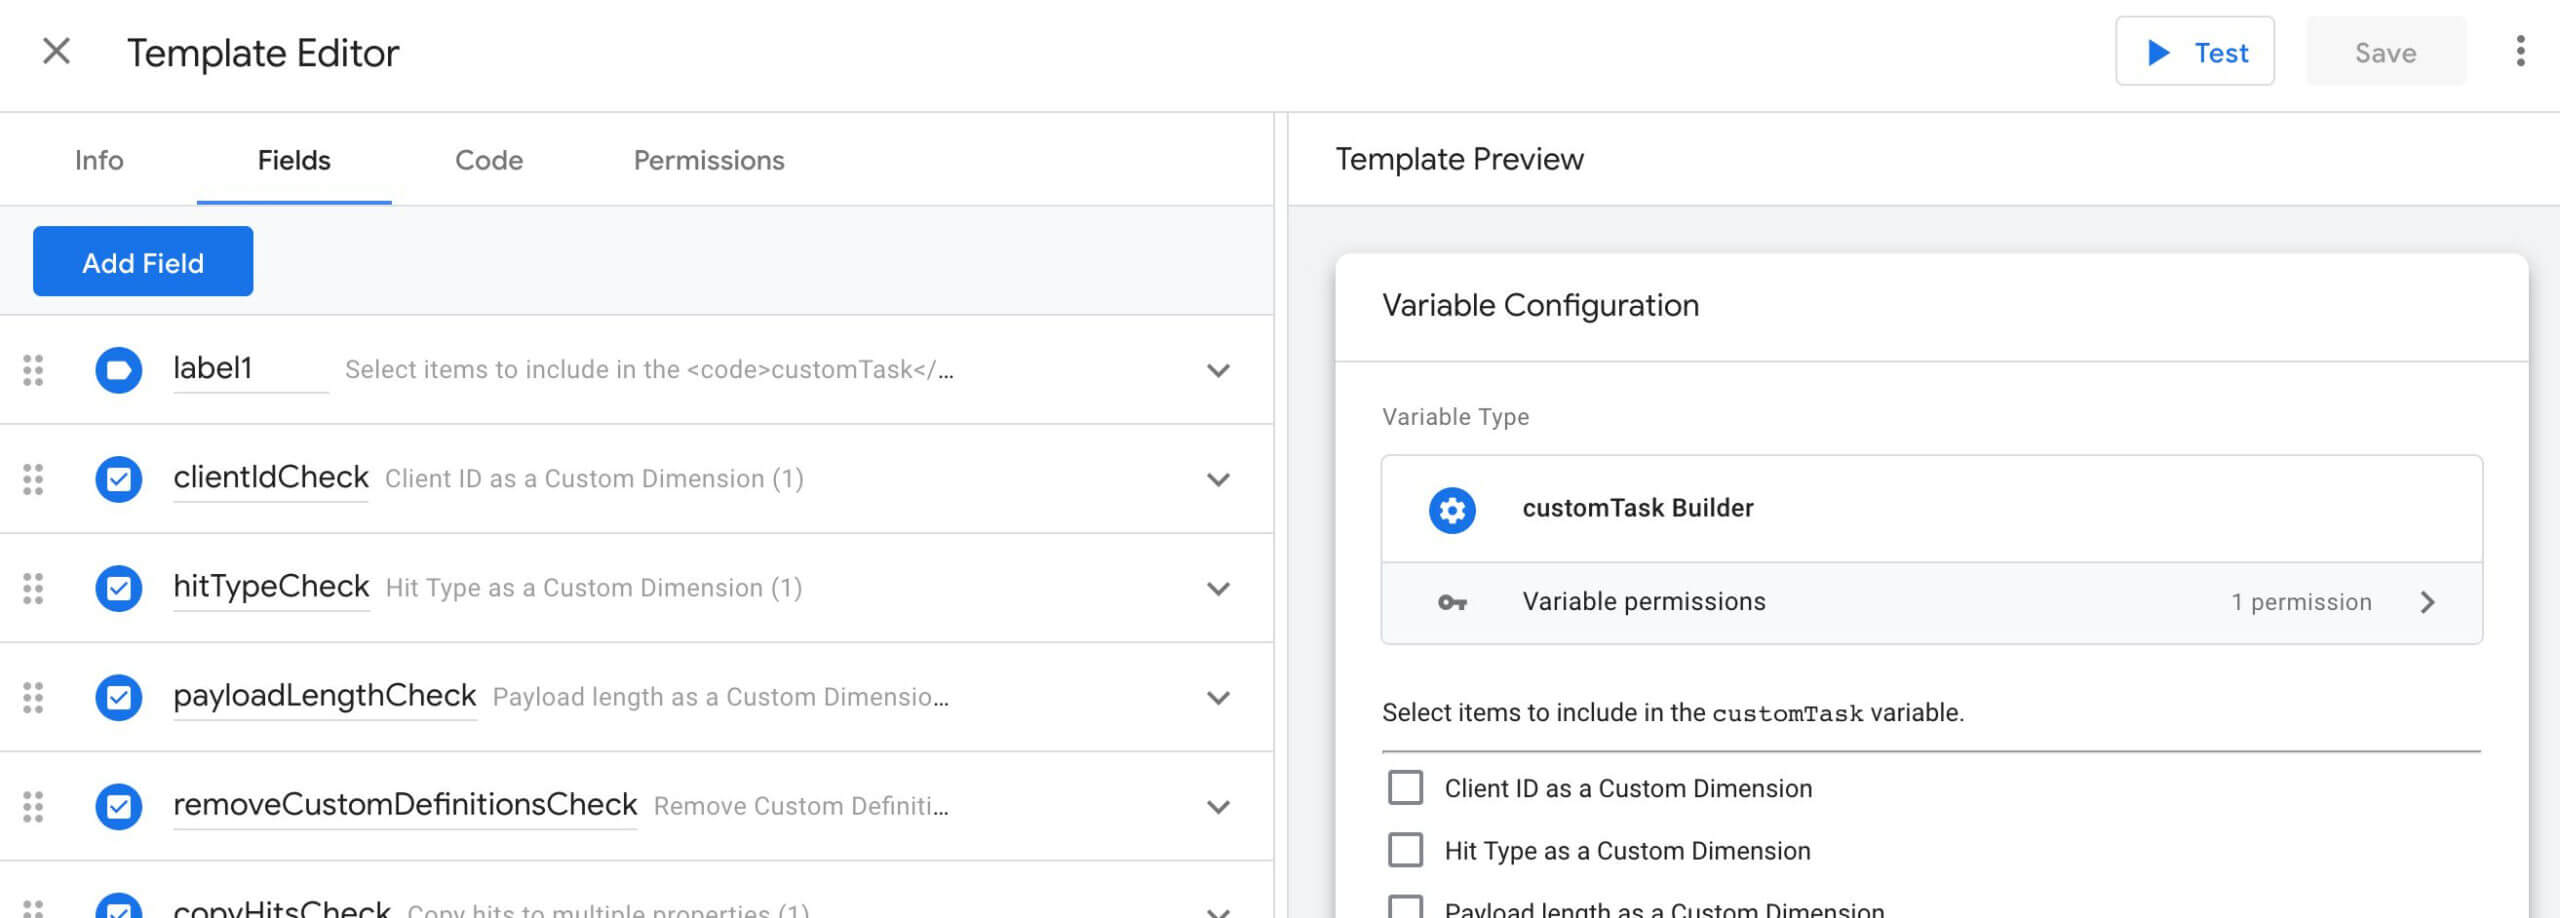 Custom Templates Guide For Google Tag Manager | Simo Ahava's Pertaining To Words Their Way Blank Sort Template